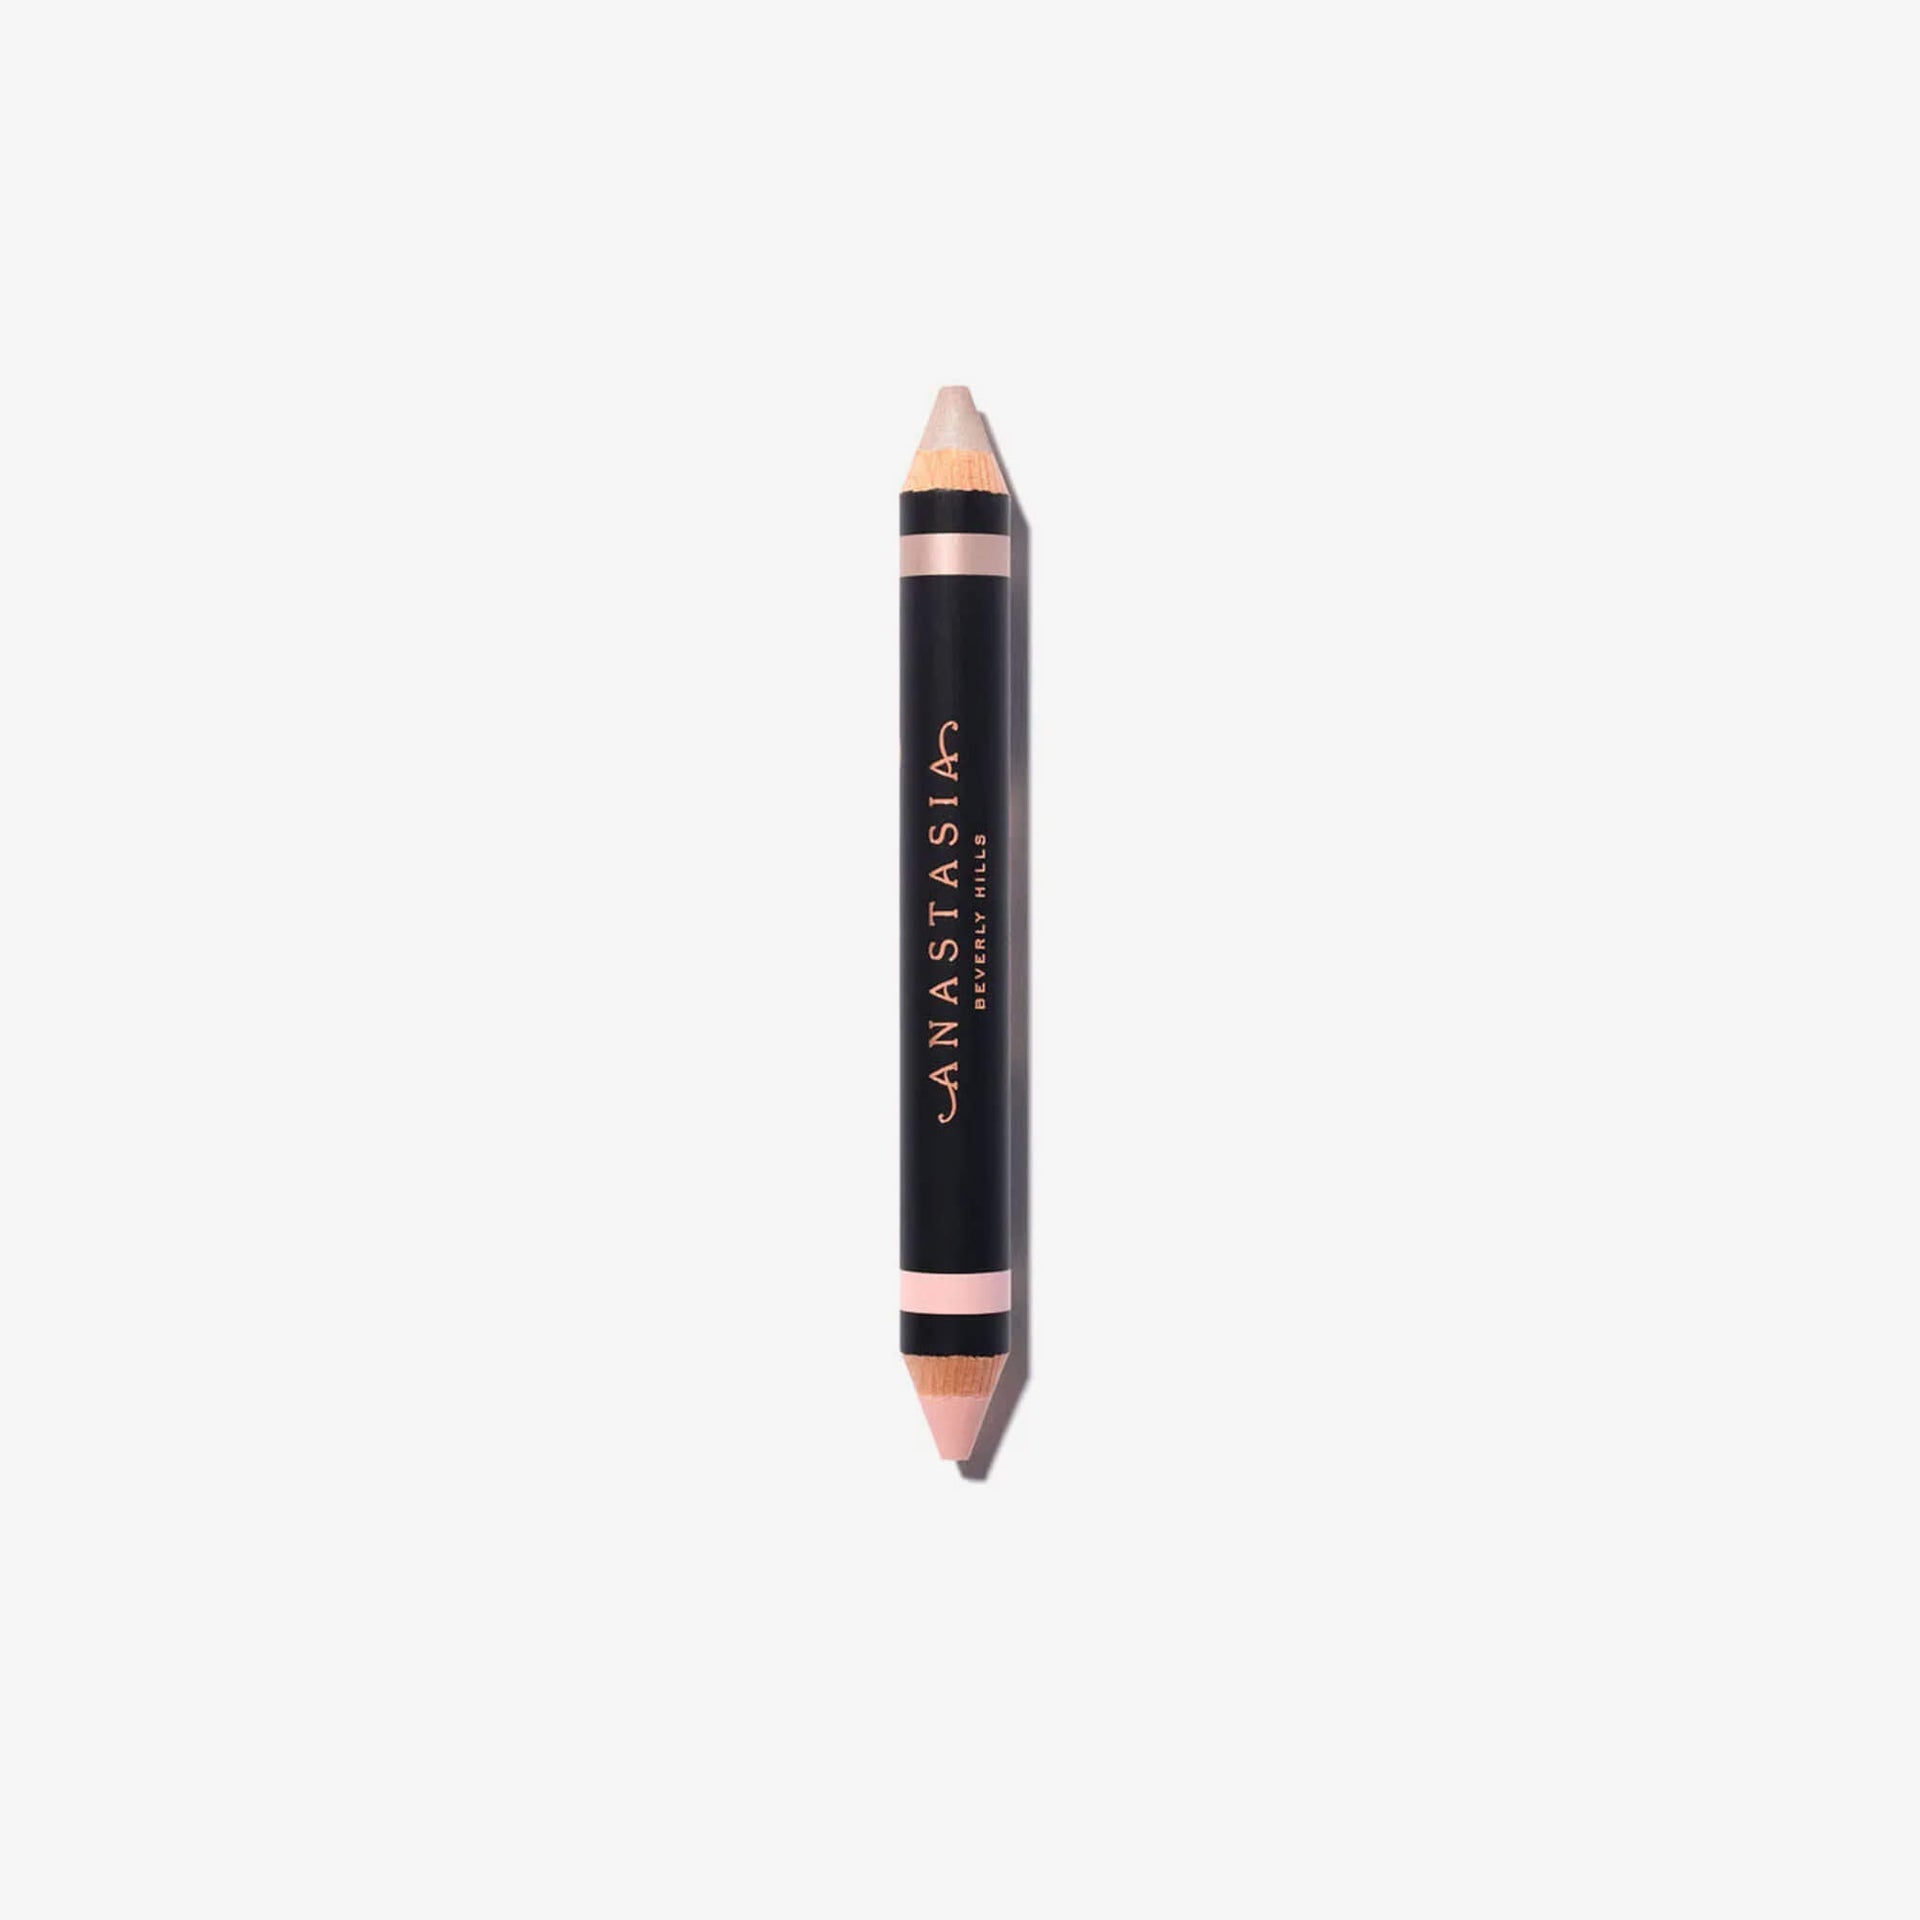 Camille/Sand Shimmer | Highlighting Duo Pencil - Camille/Sand Shimmer 